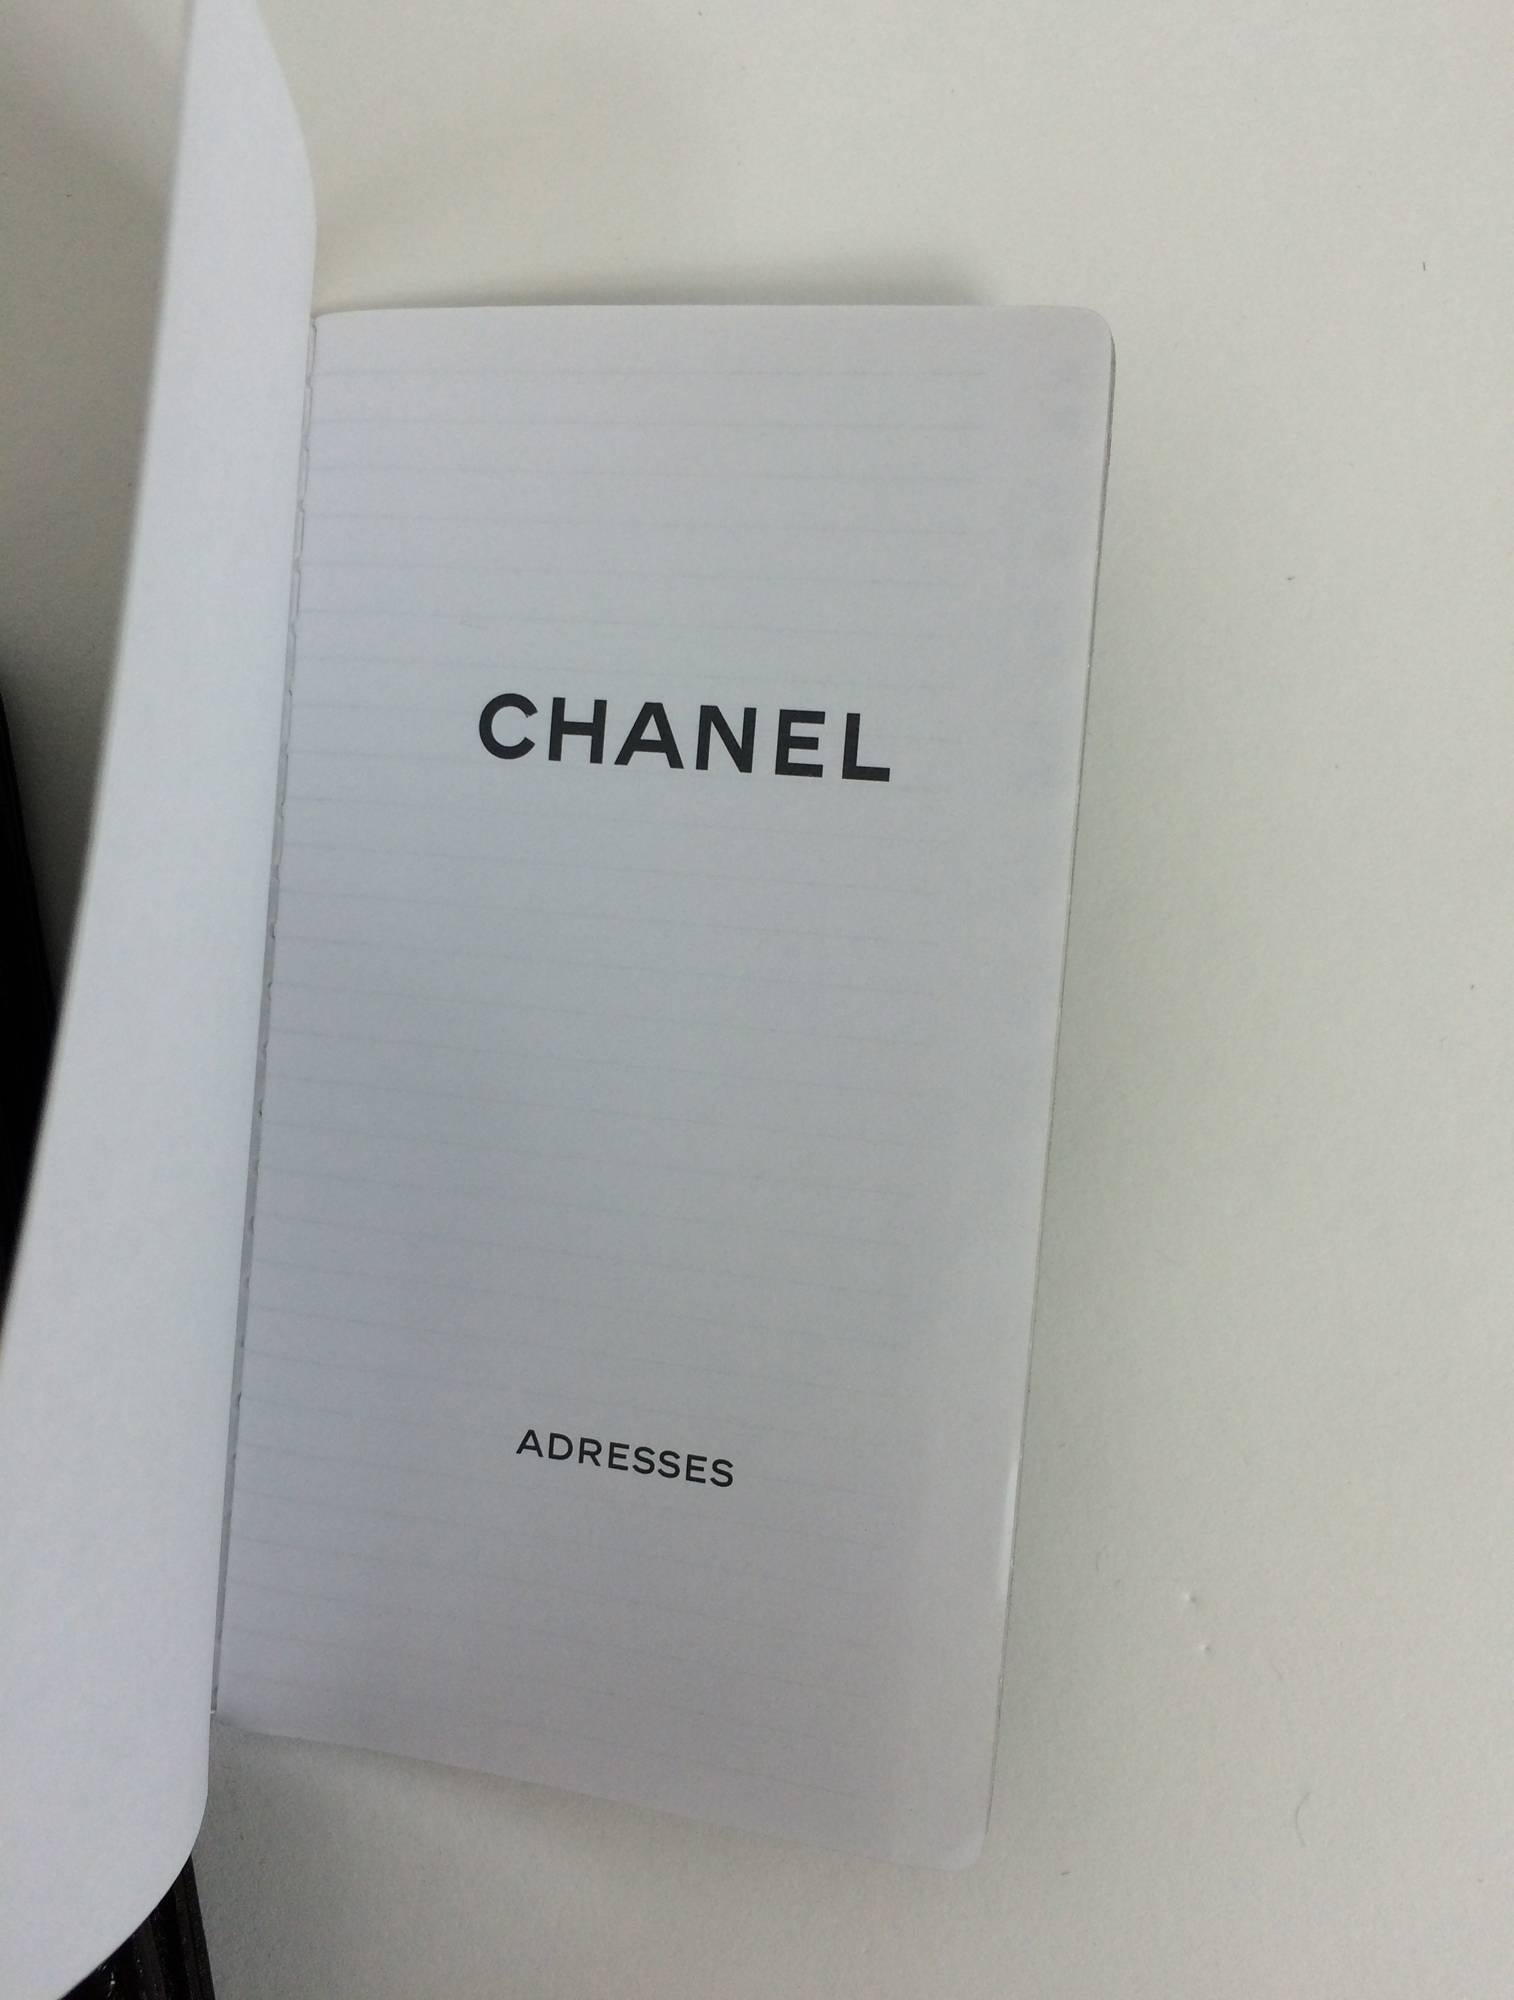 Chanel quilted leather datebook 2009 unused  4